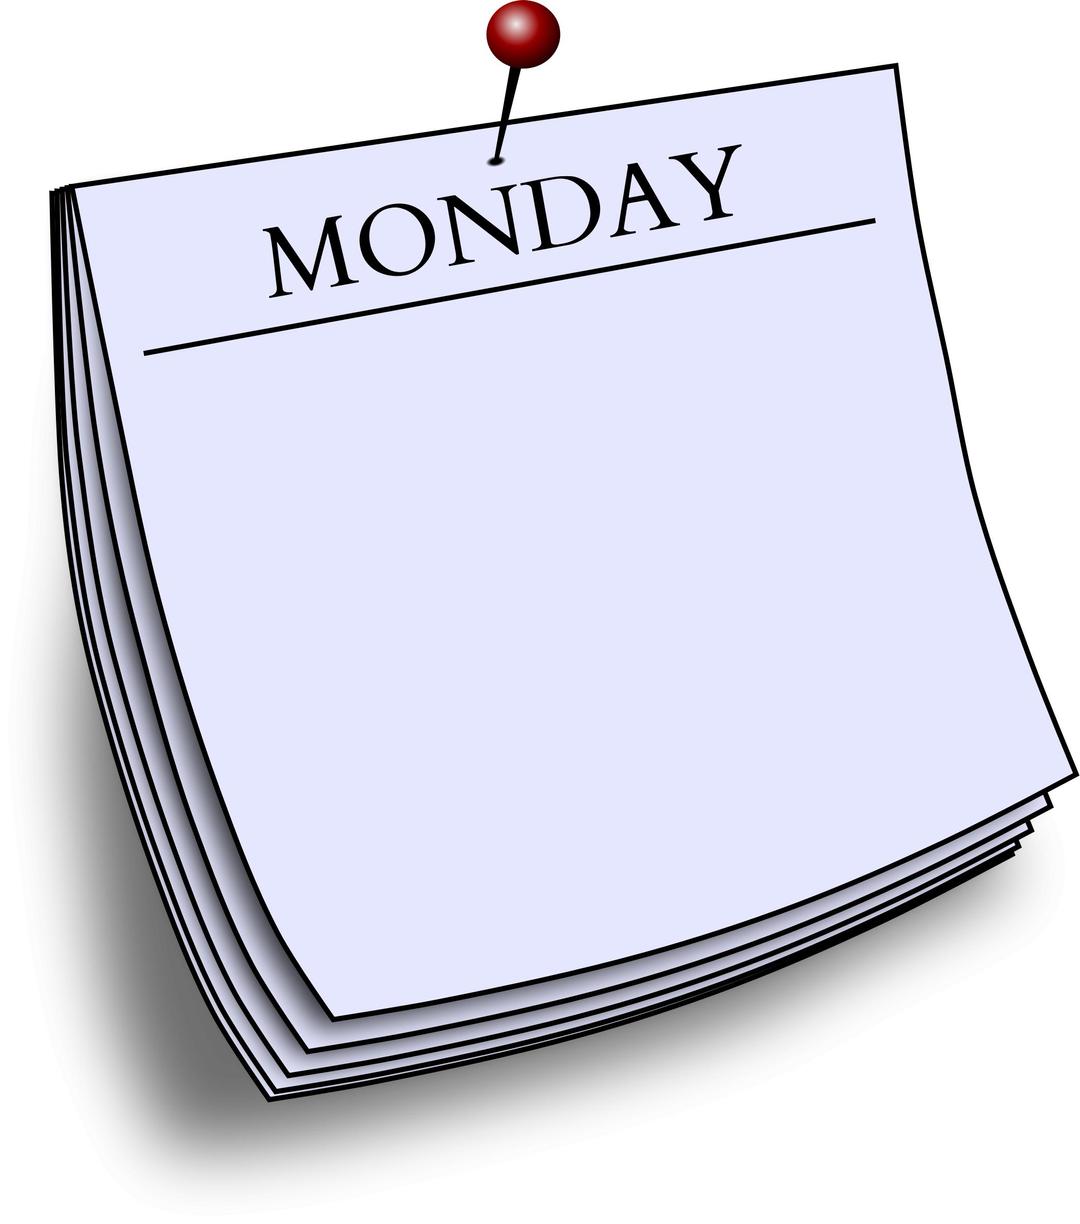 Daily note - Monday png transparent